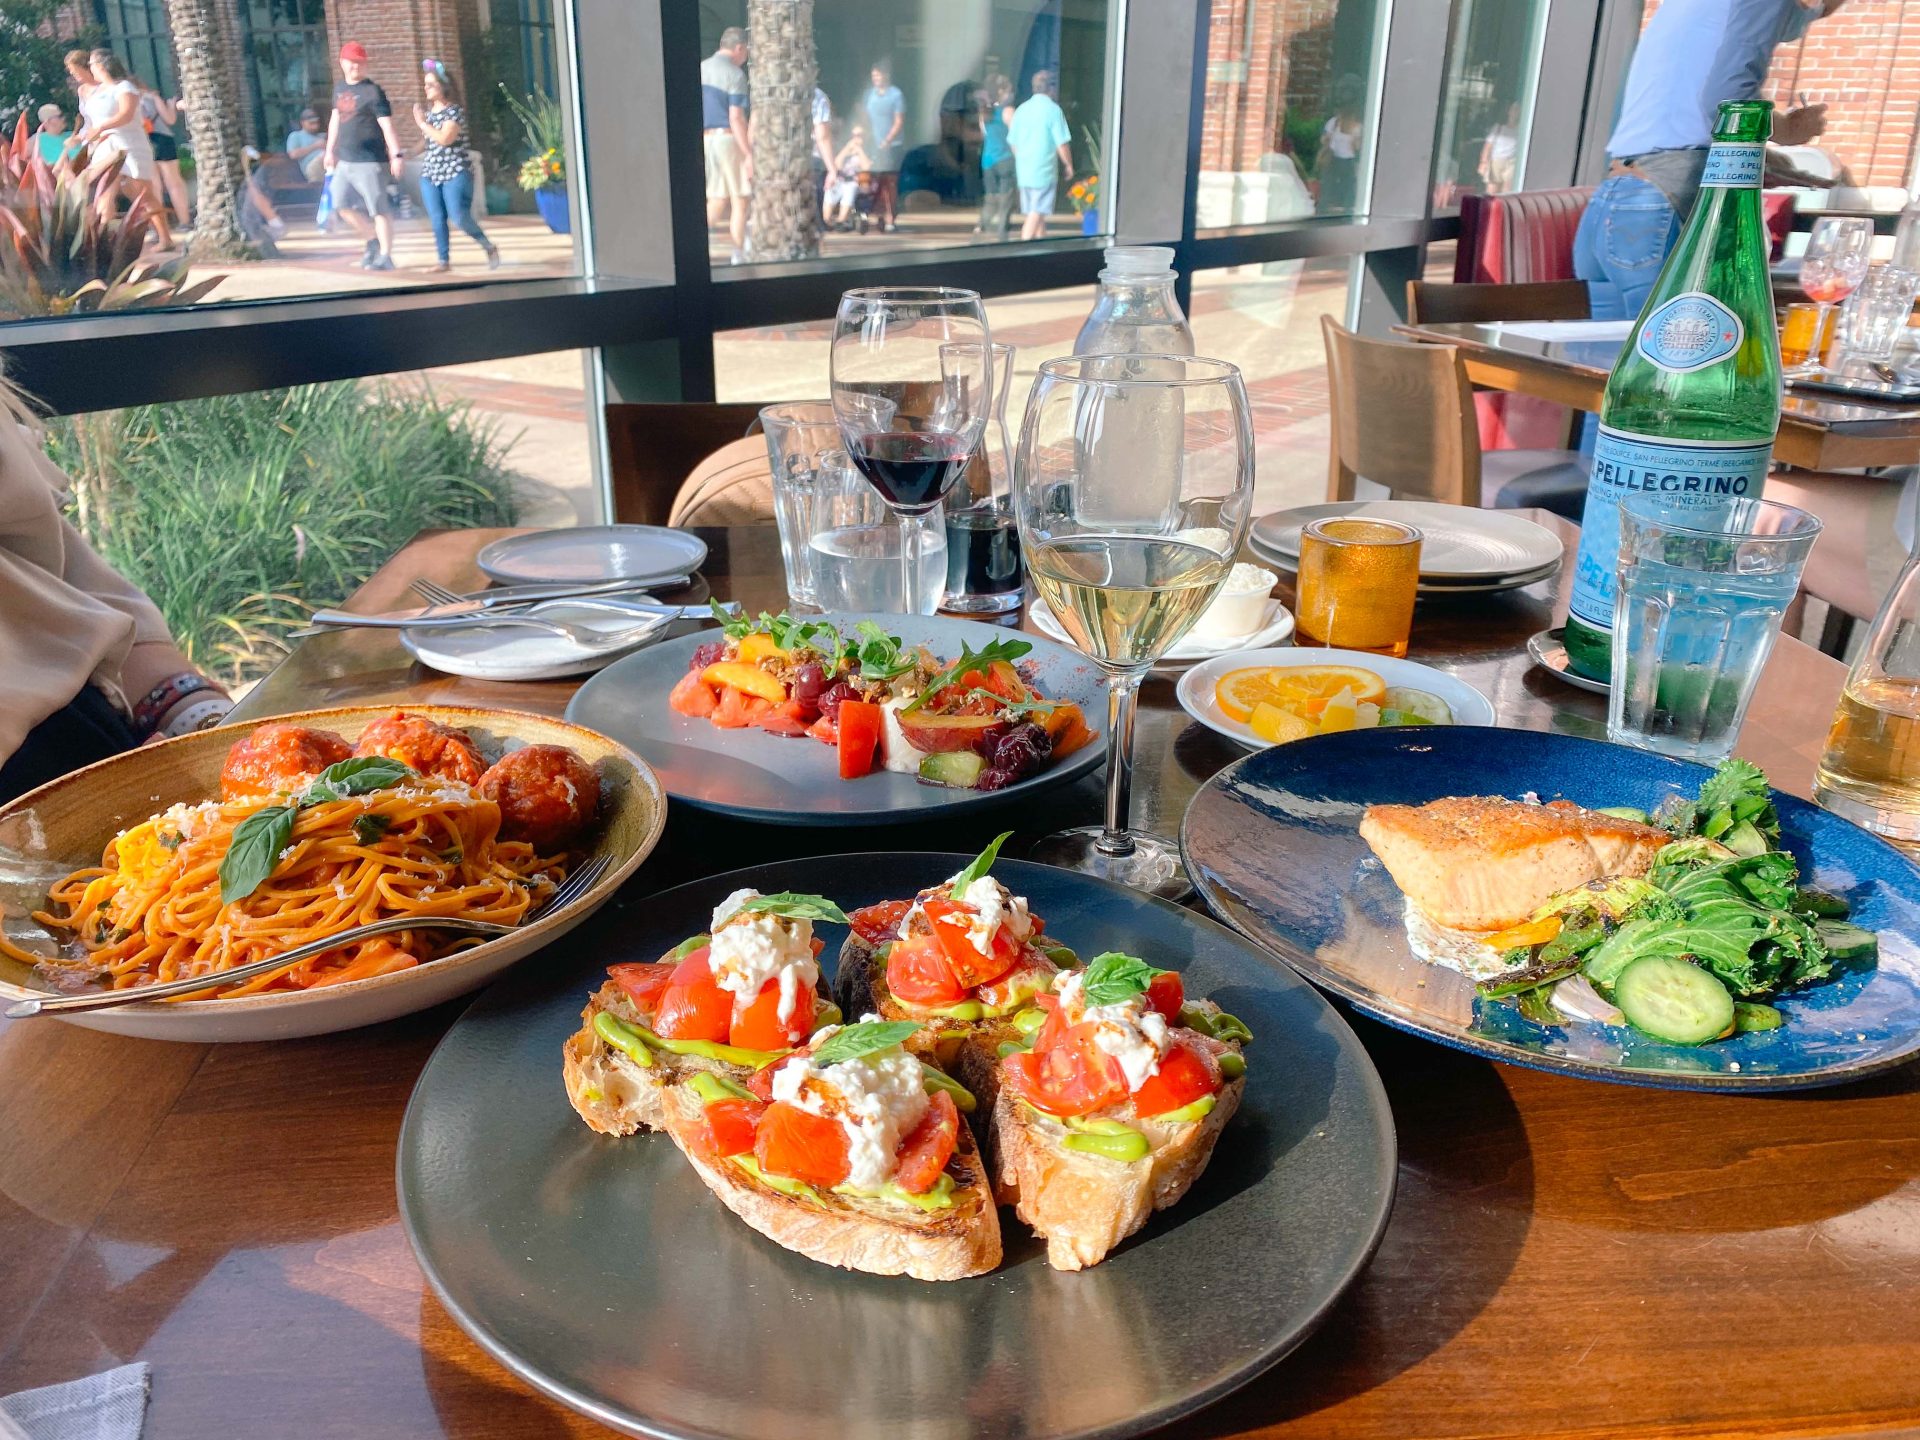 Wolfgang Puck Bar & Grill Disney springs, best food at disney springs, walt disney world dinner, most amazing meal, salmon salad, spaghetti and meatballs, coffee dessert 